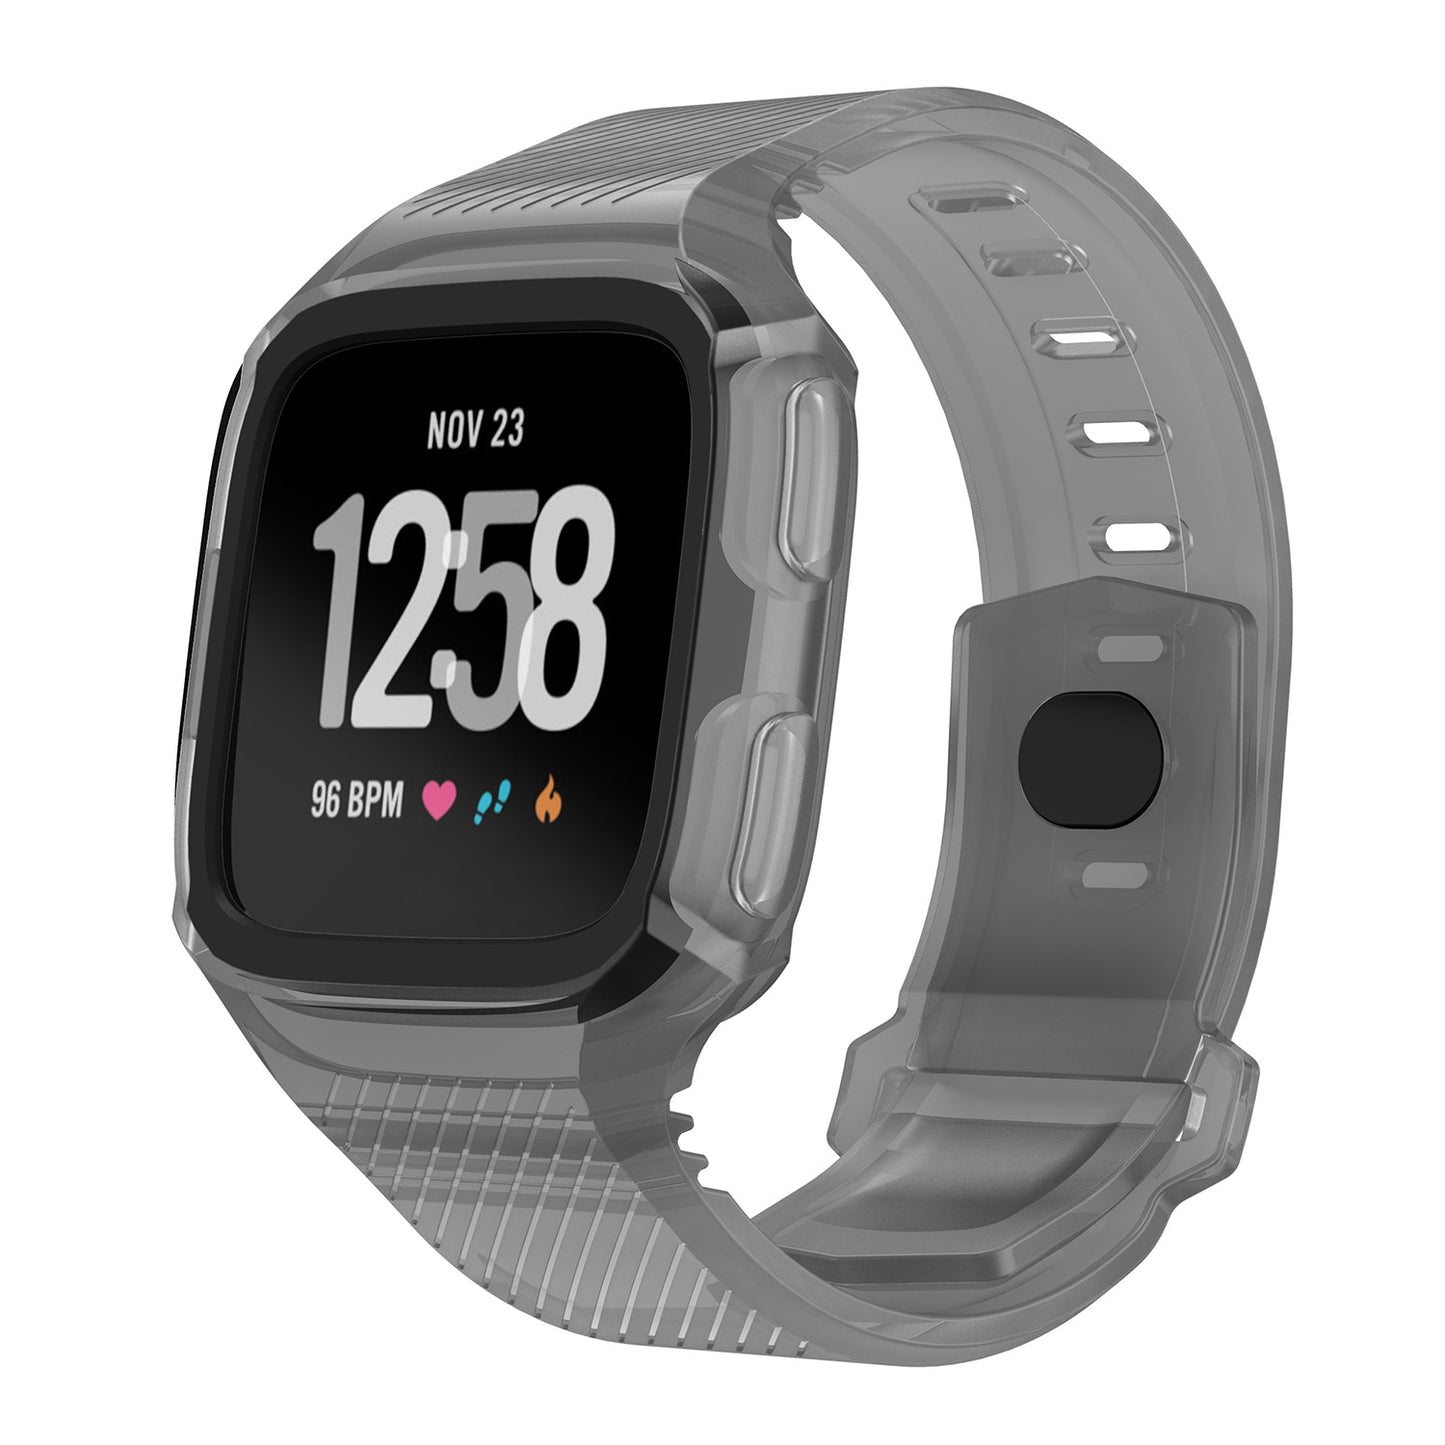 Rubber Strap w/ Protective Case for Fitbit Versa